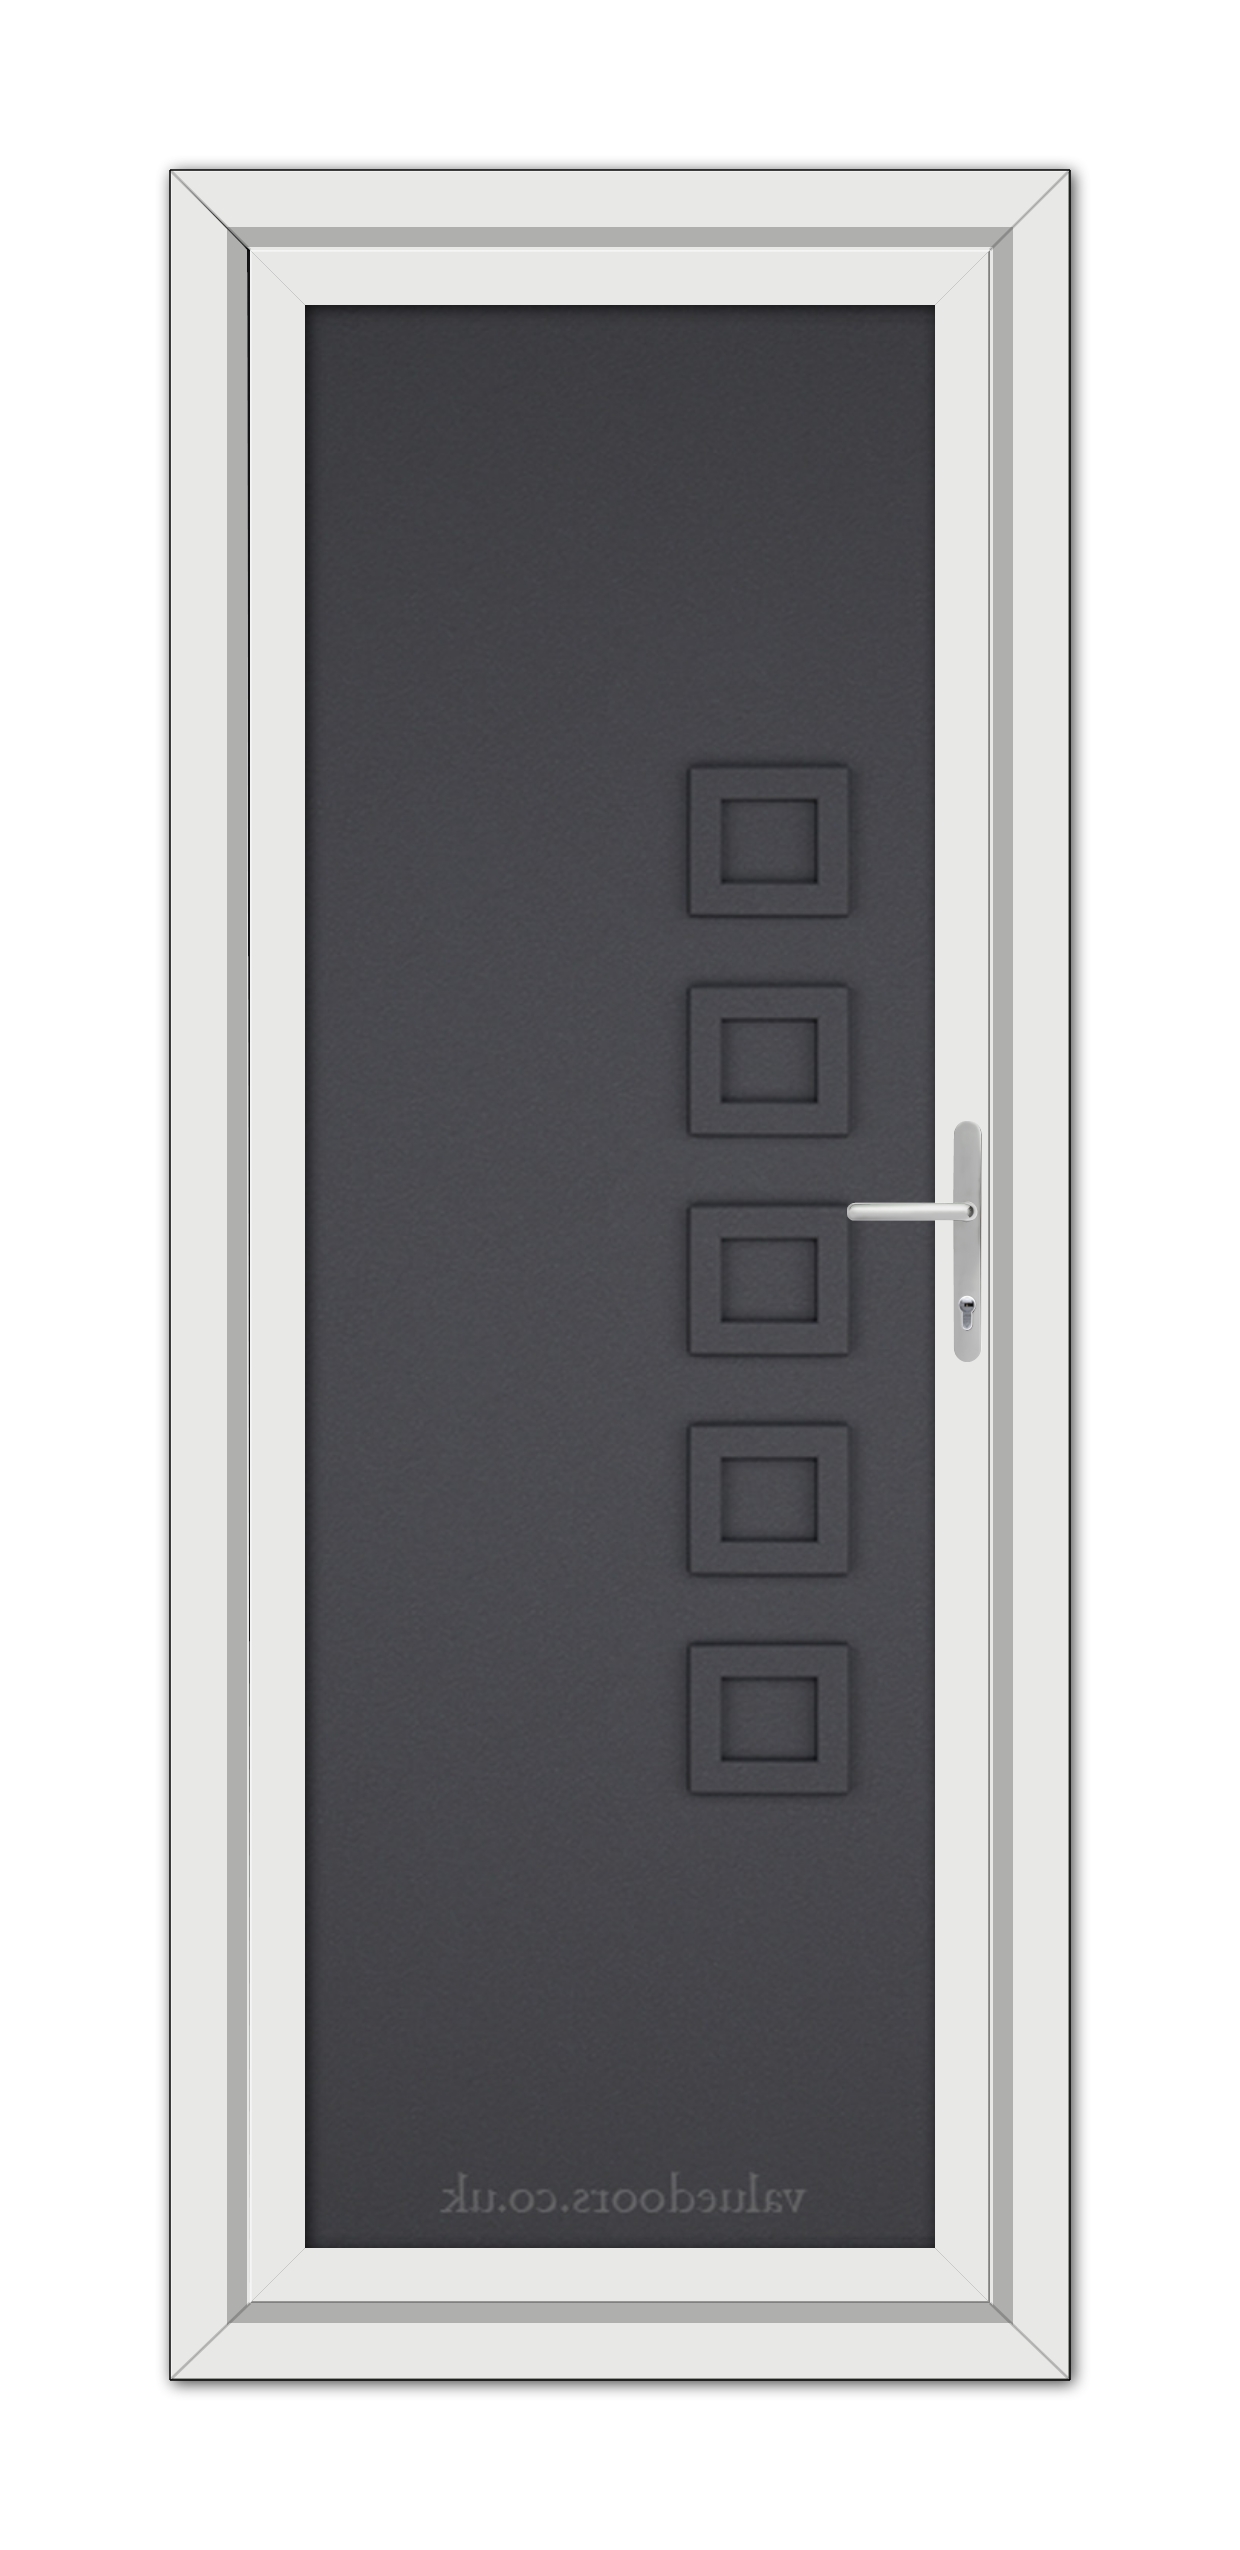 A modern Grey Grained Malaga Solid uPVC Door with a vertical handle and five square windows positioned in a vertical line.